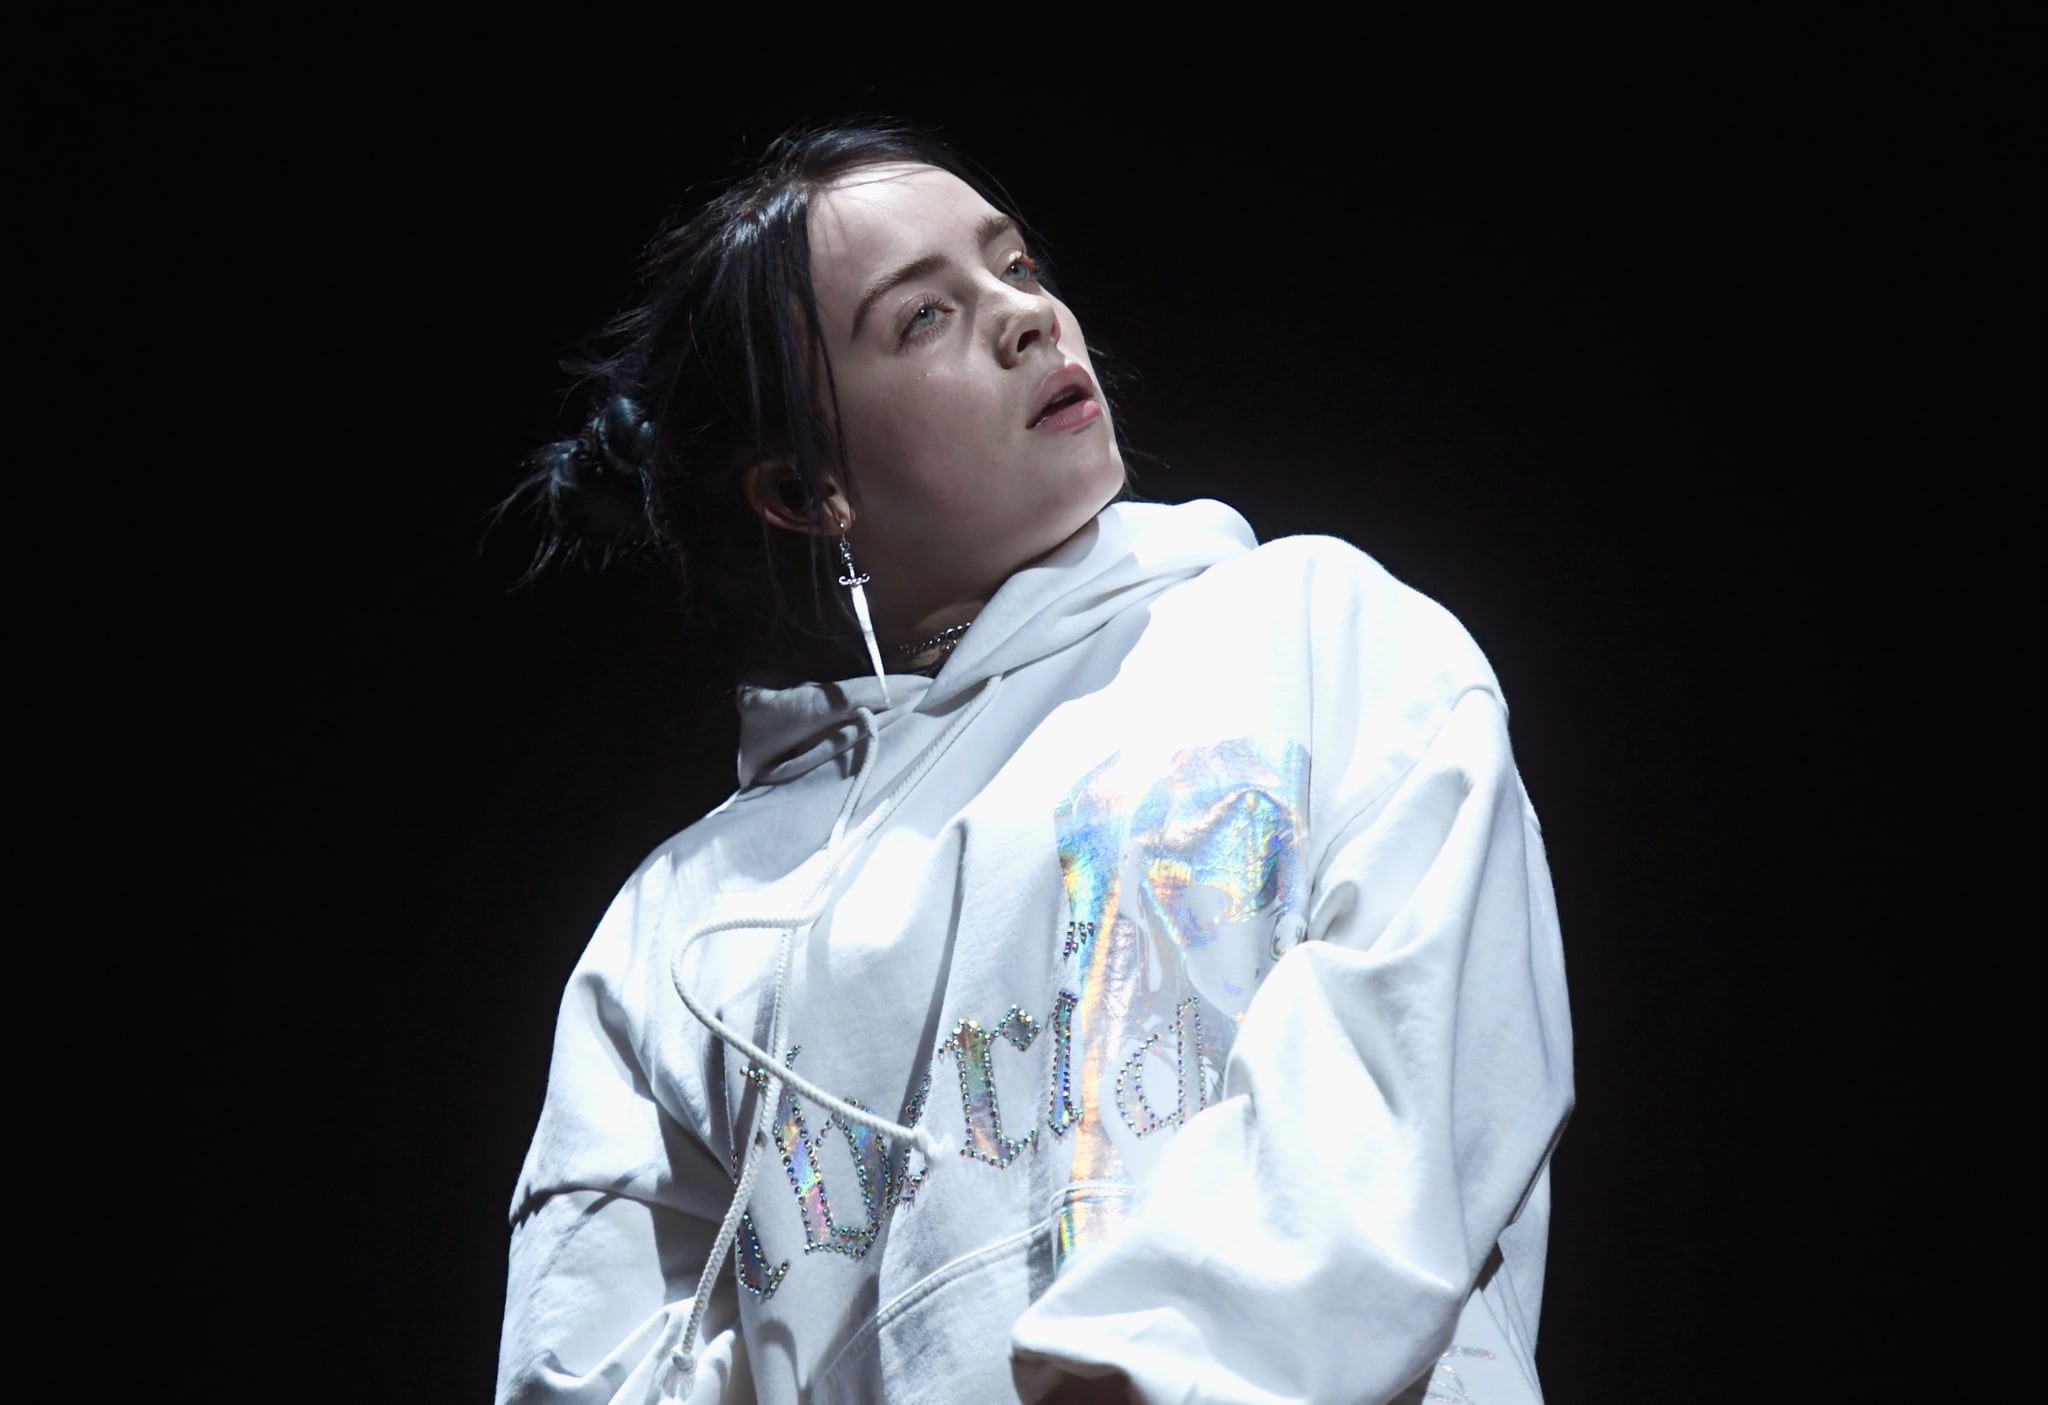 INDIO, CA - APRIL 13:  Billie Eilish performs at Outdoor Theatre during the 2019 Coachella Valley Music And Arts Festival on April 13, 2019 in Indio, California.  (Photo by Frazer Harrison/Getty Images for Coachella)